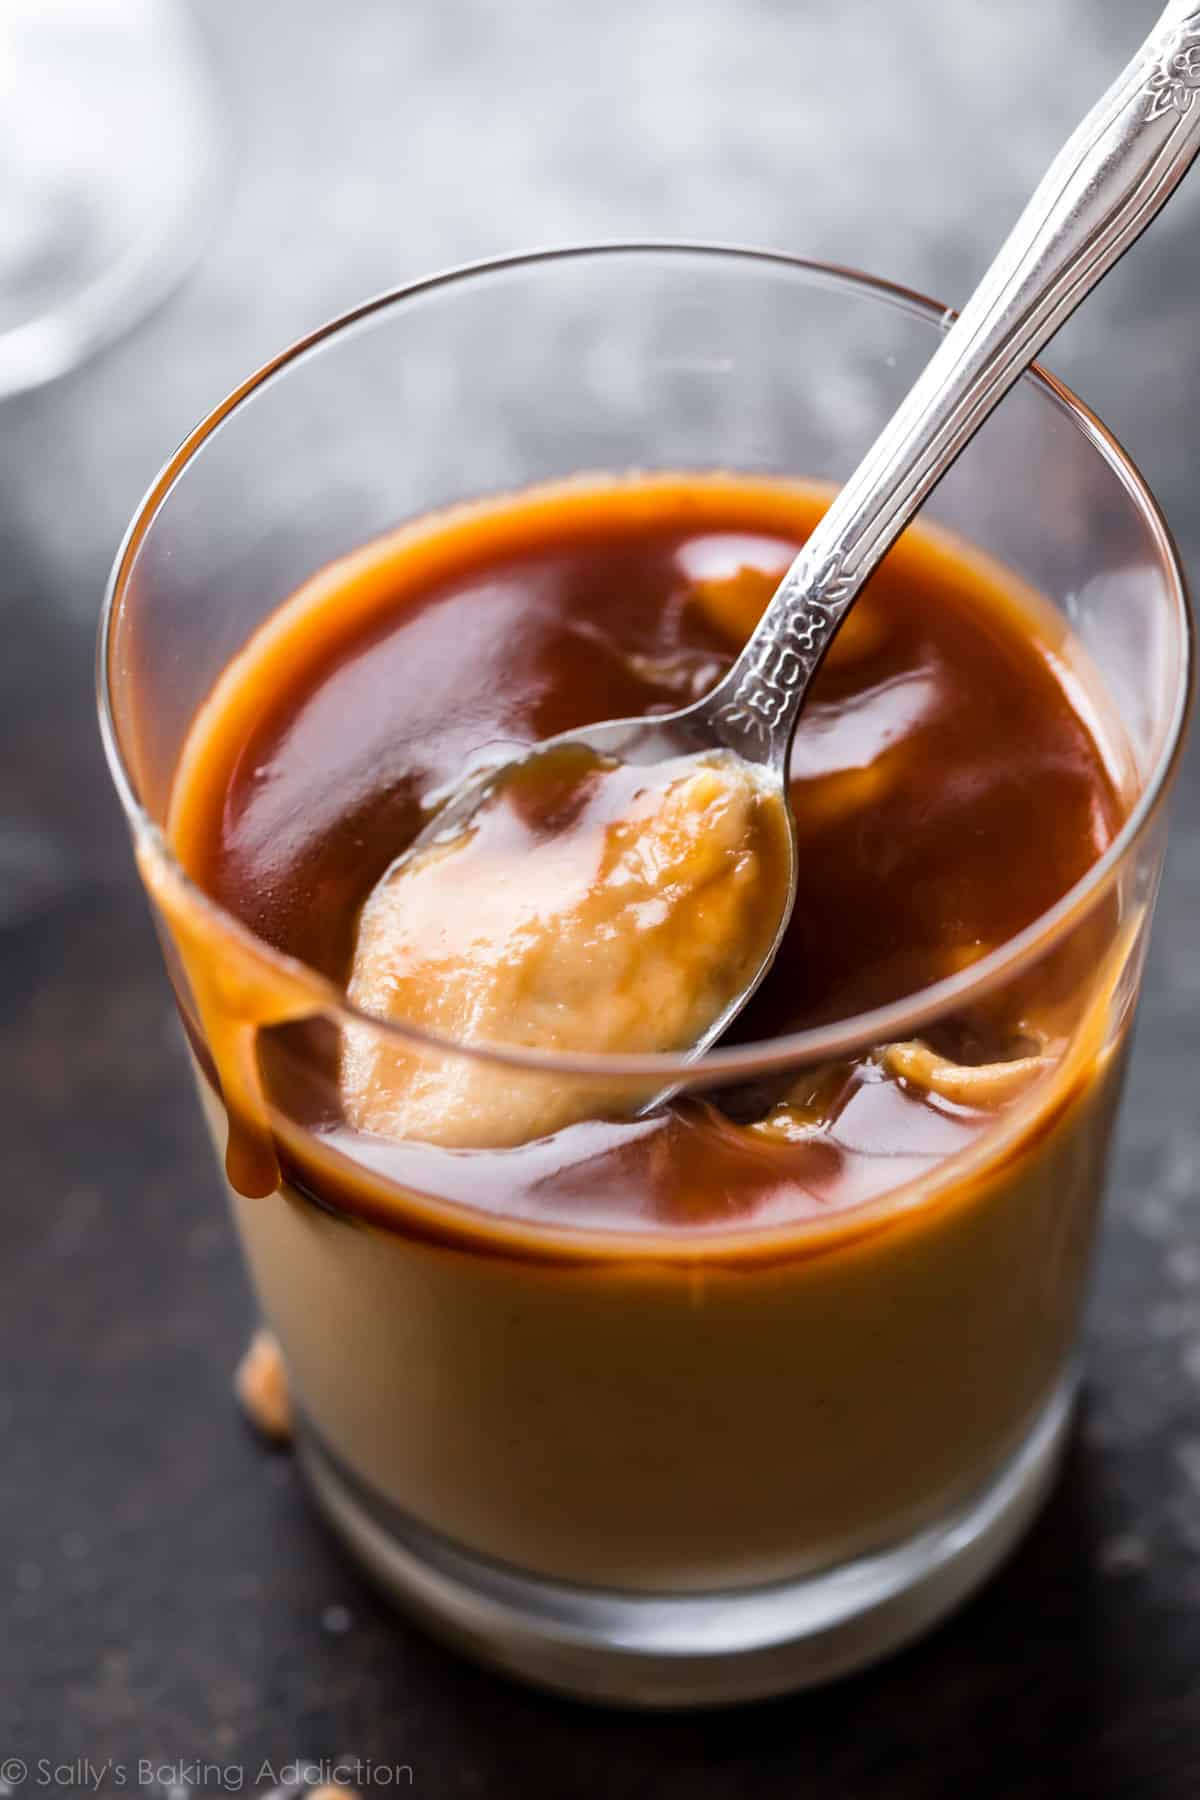 Spoonful of homemade butterscotch pudding with salted caramel in glass cup